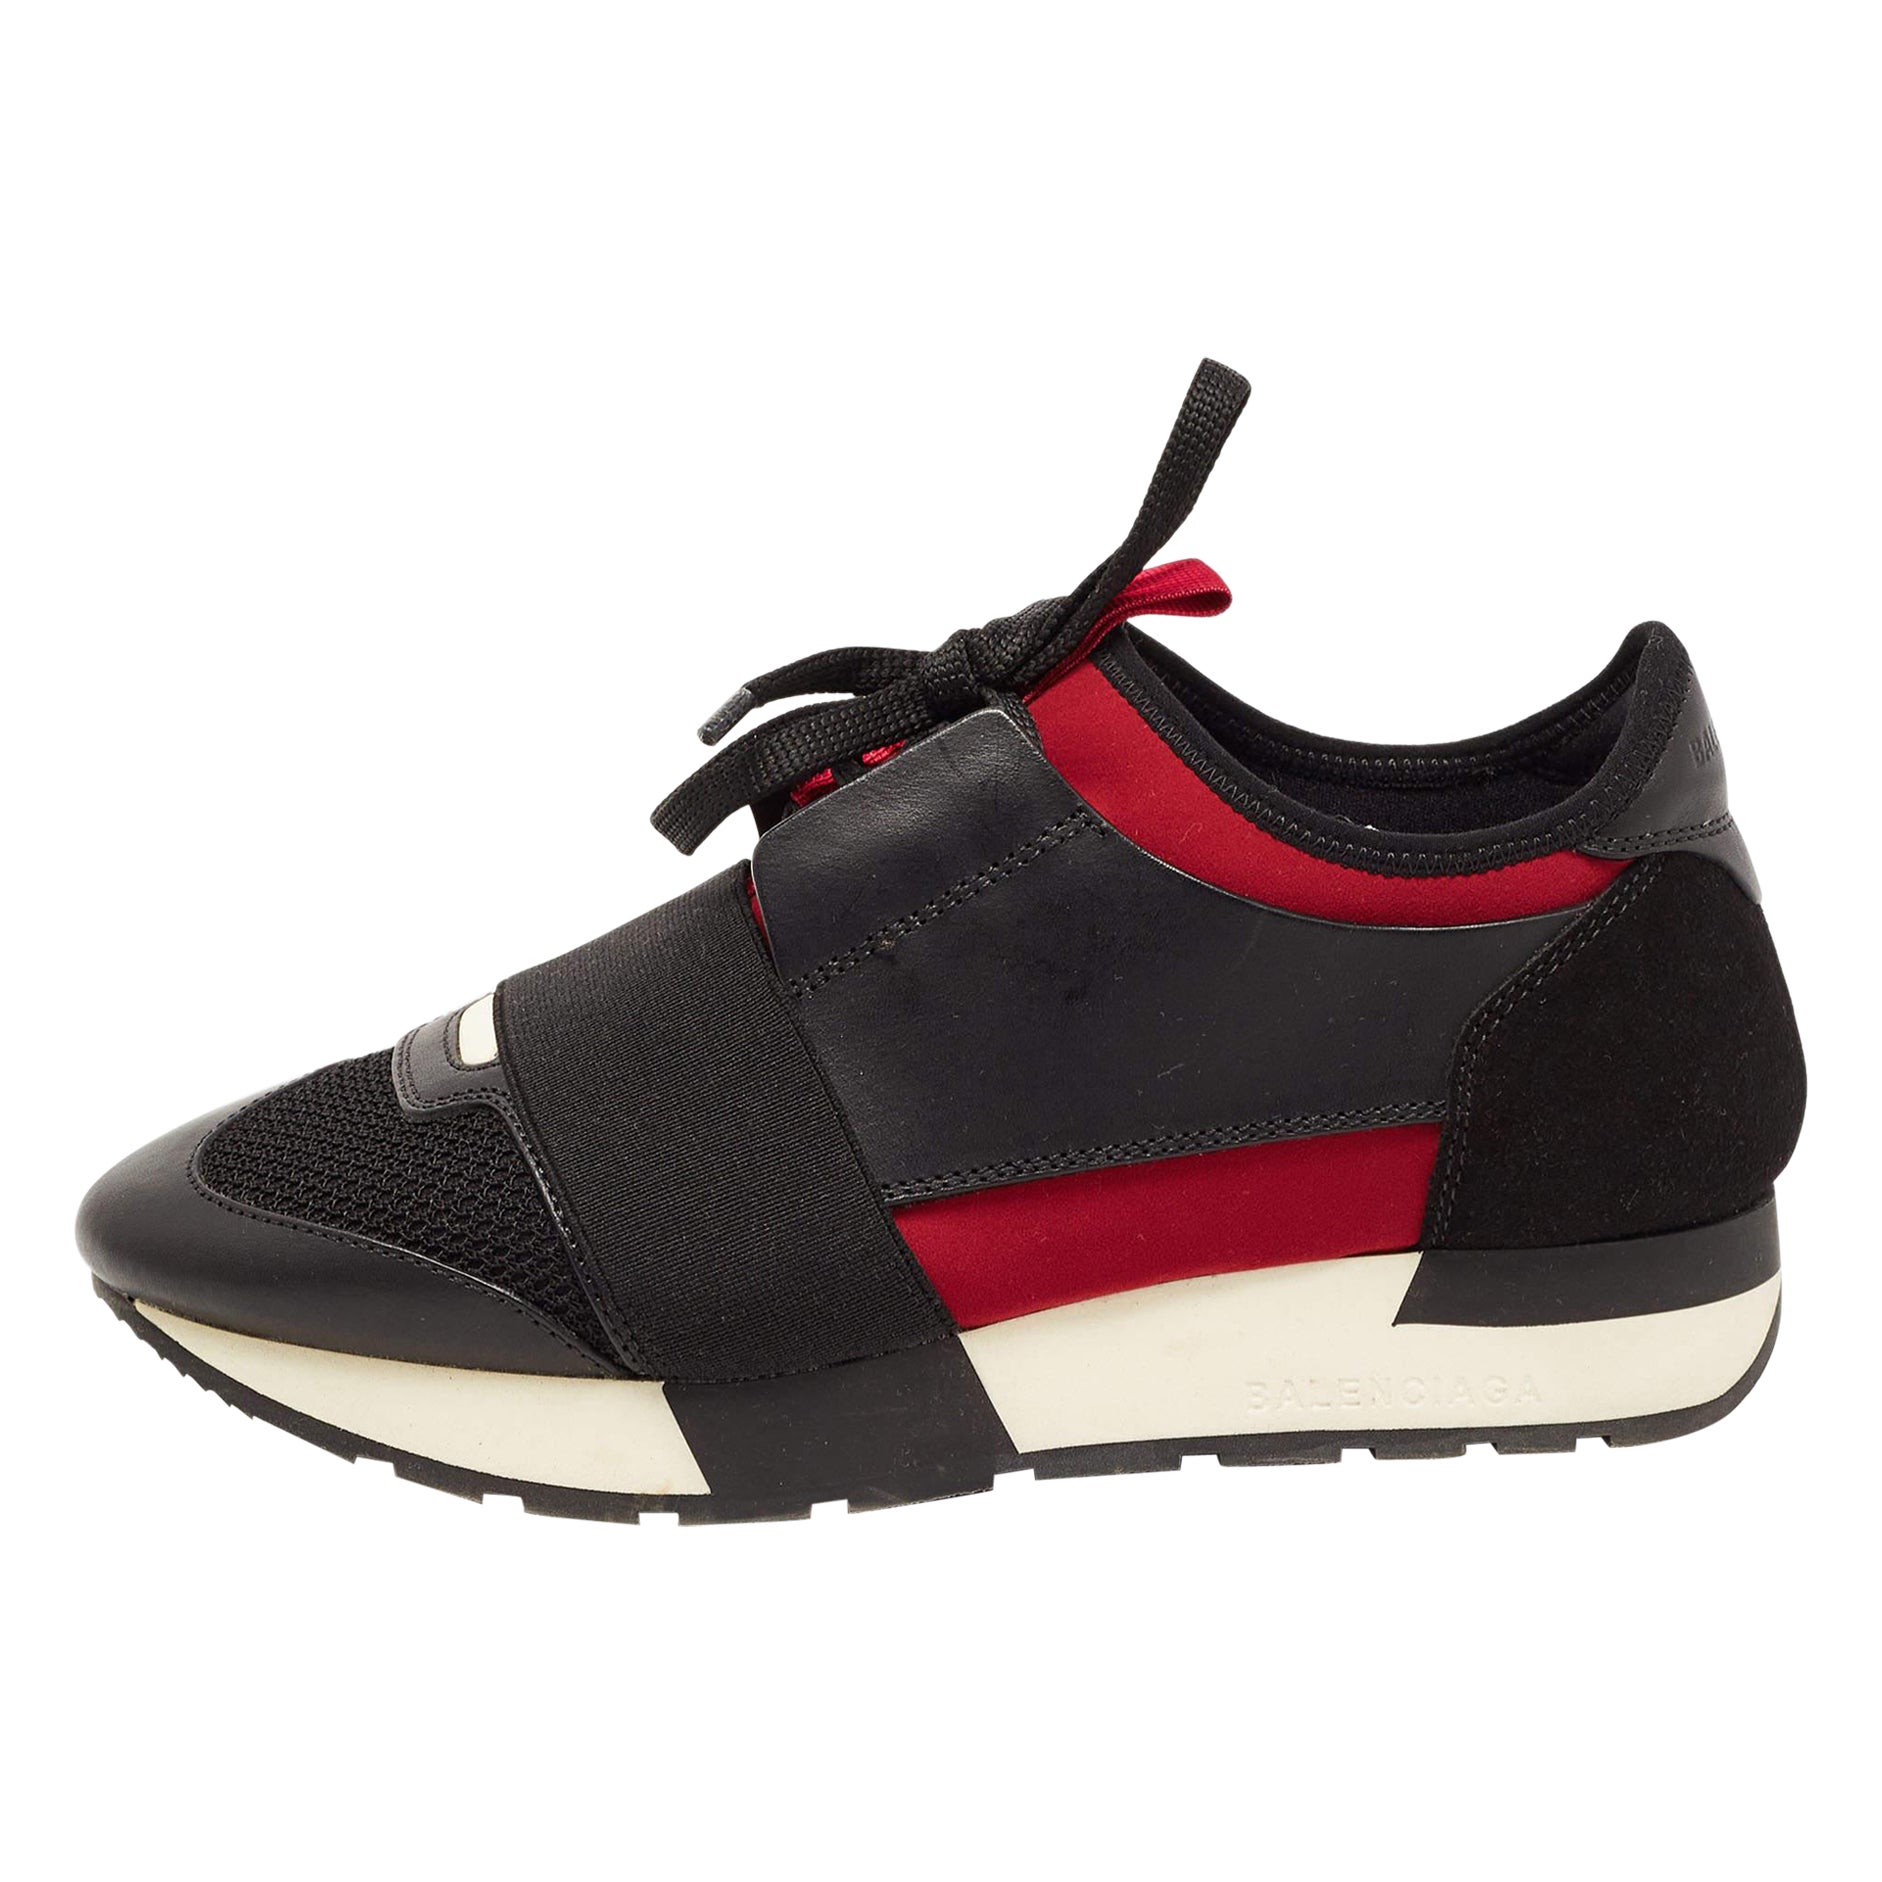 Balenciaga Black/Red Leather and Mesh Race Runner Sneakers Size 36